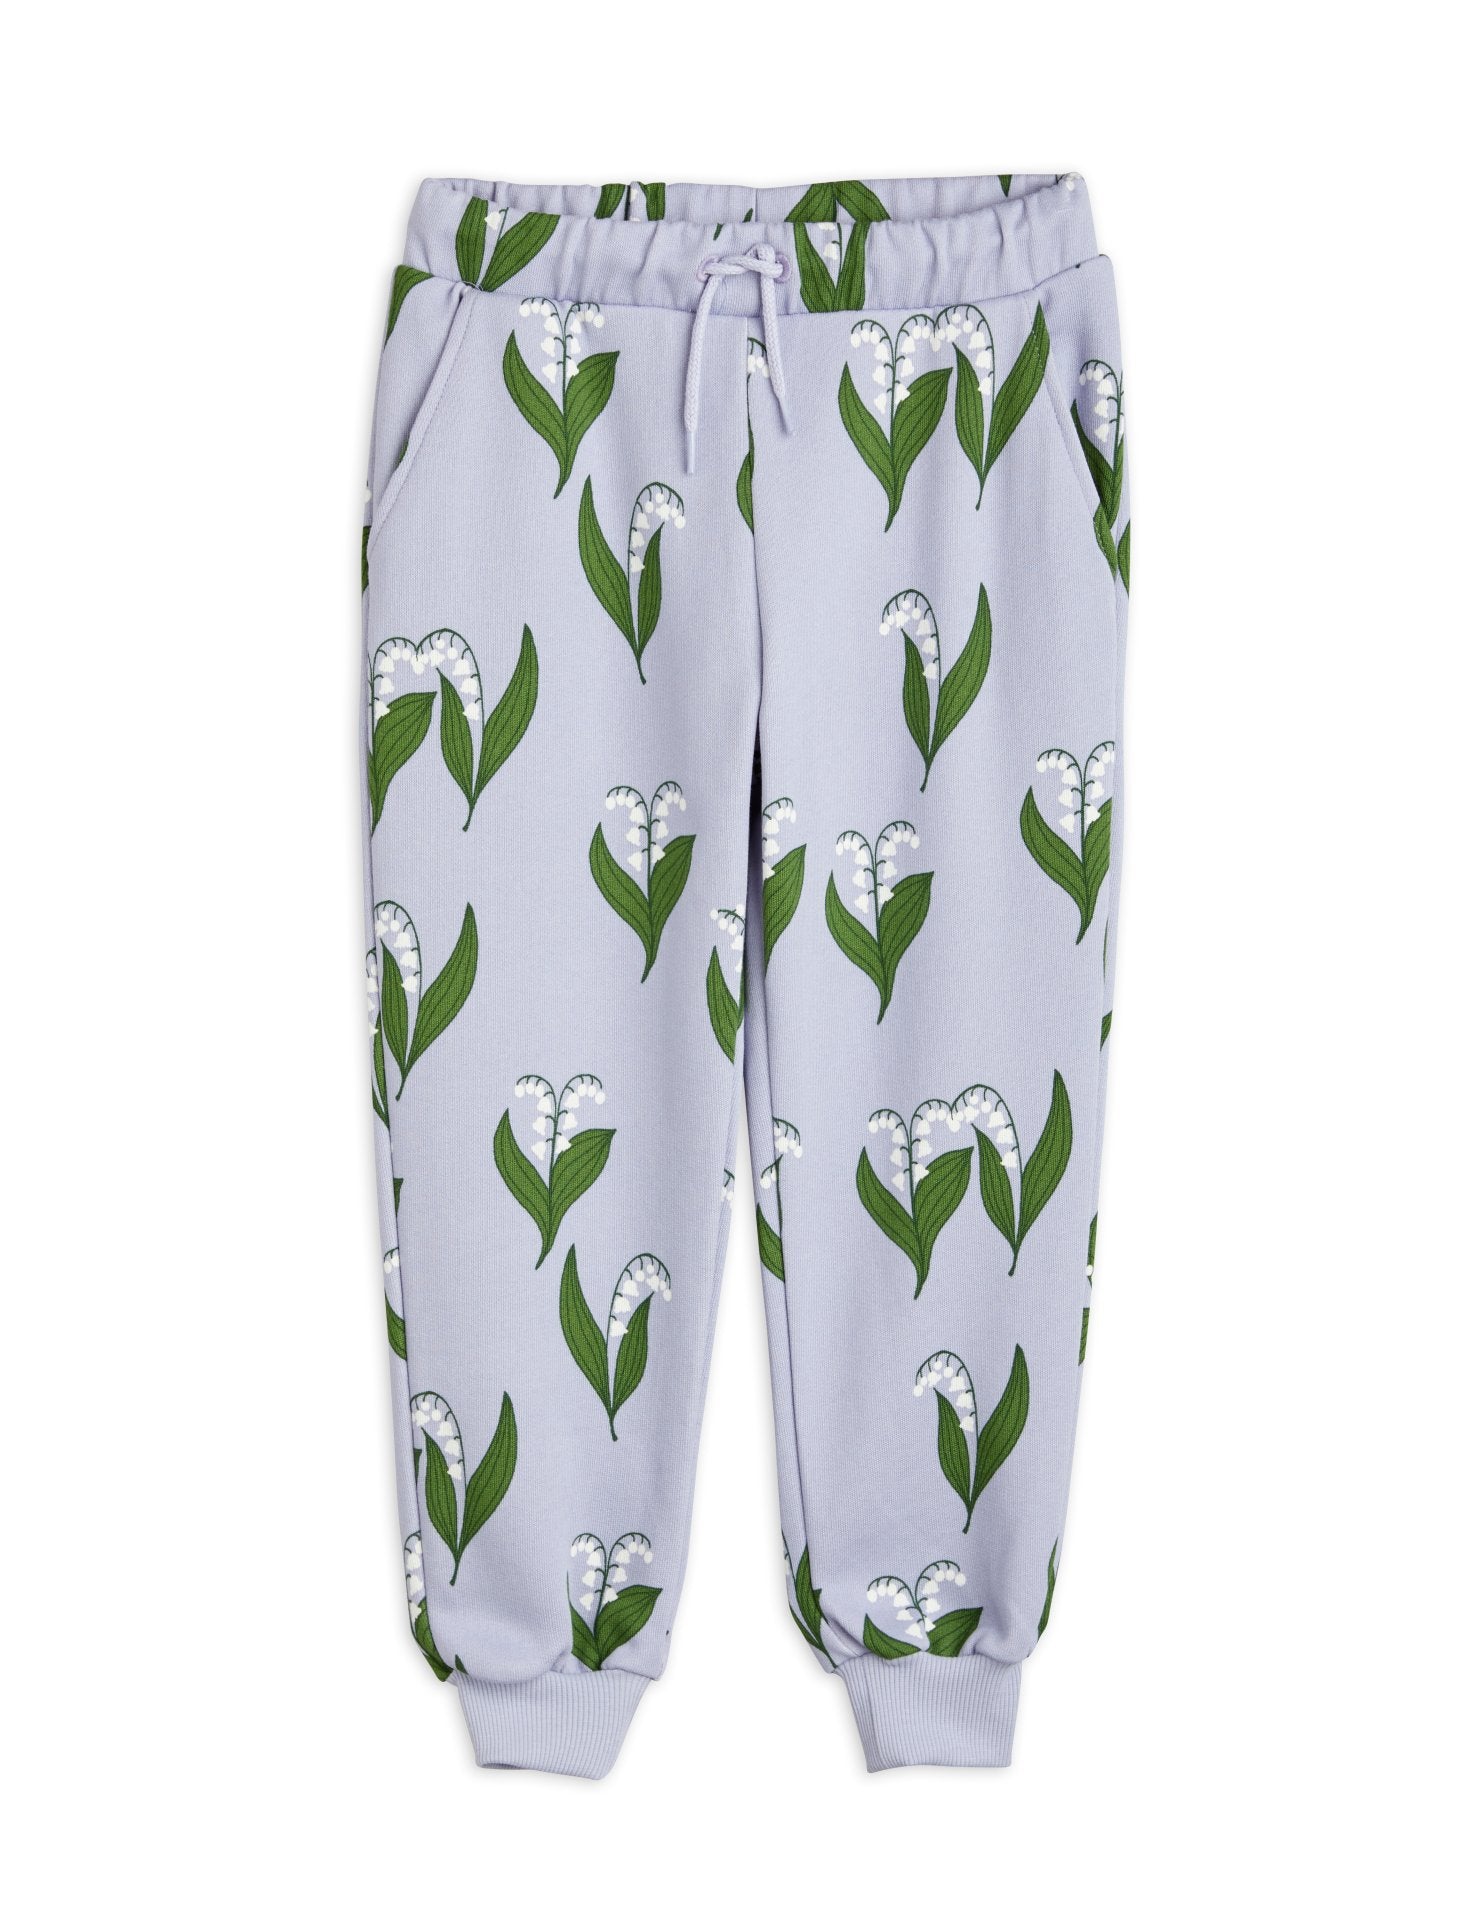 Lily of the valley aop sweatpants